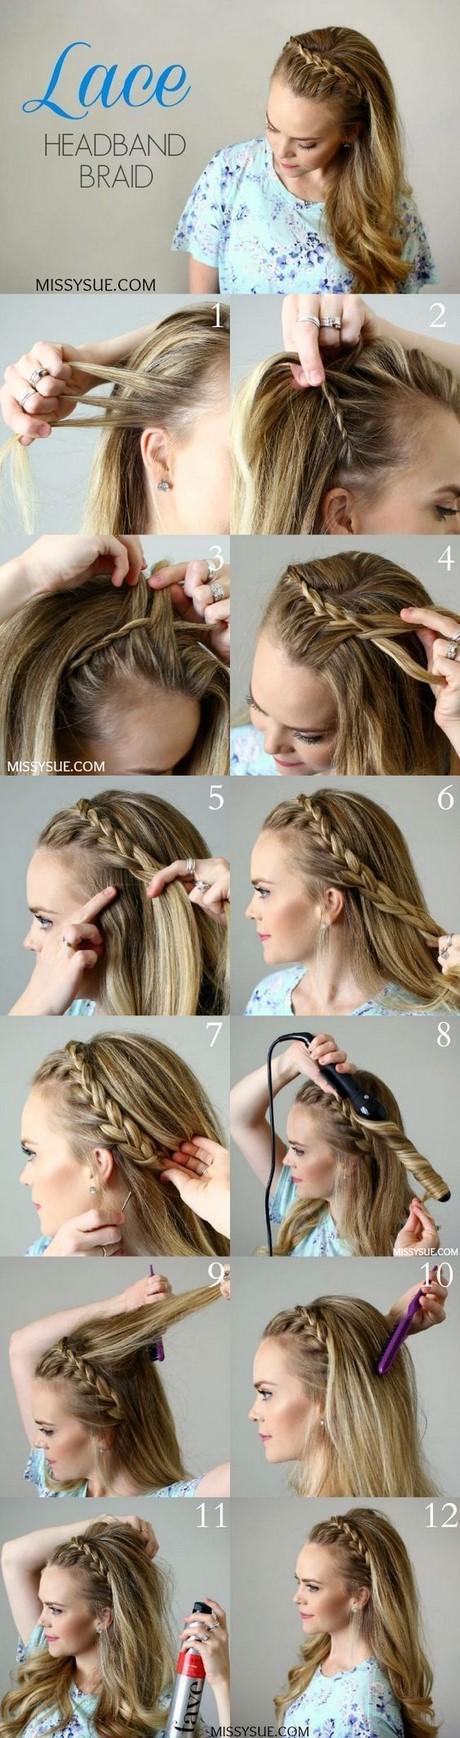 Where to get your hair braided where-to-get-your-hair-braided-15_4